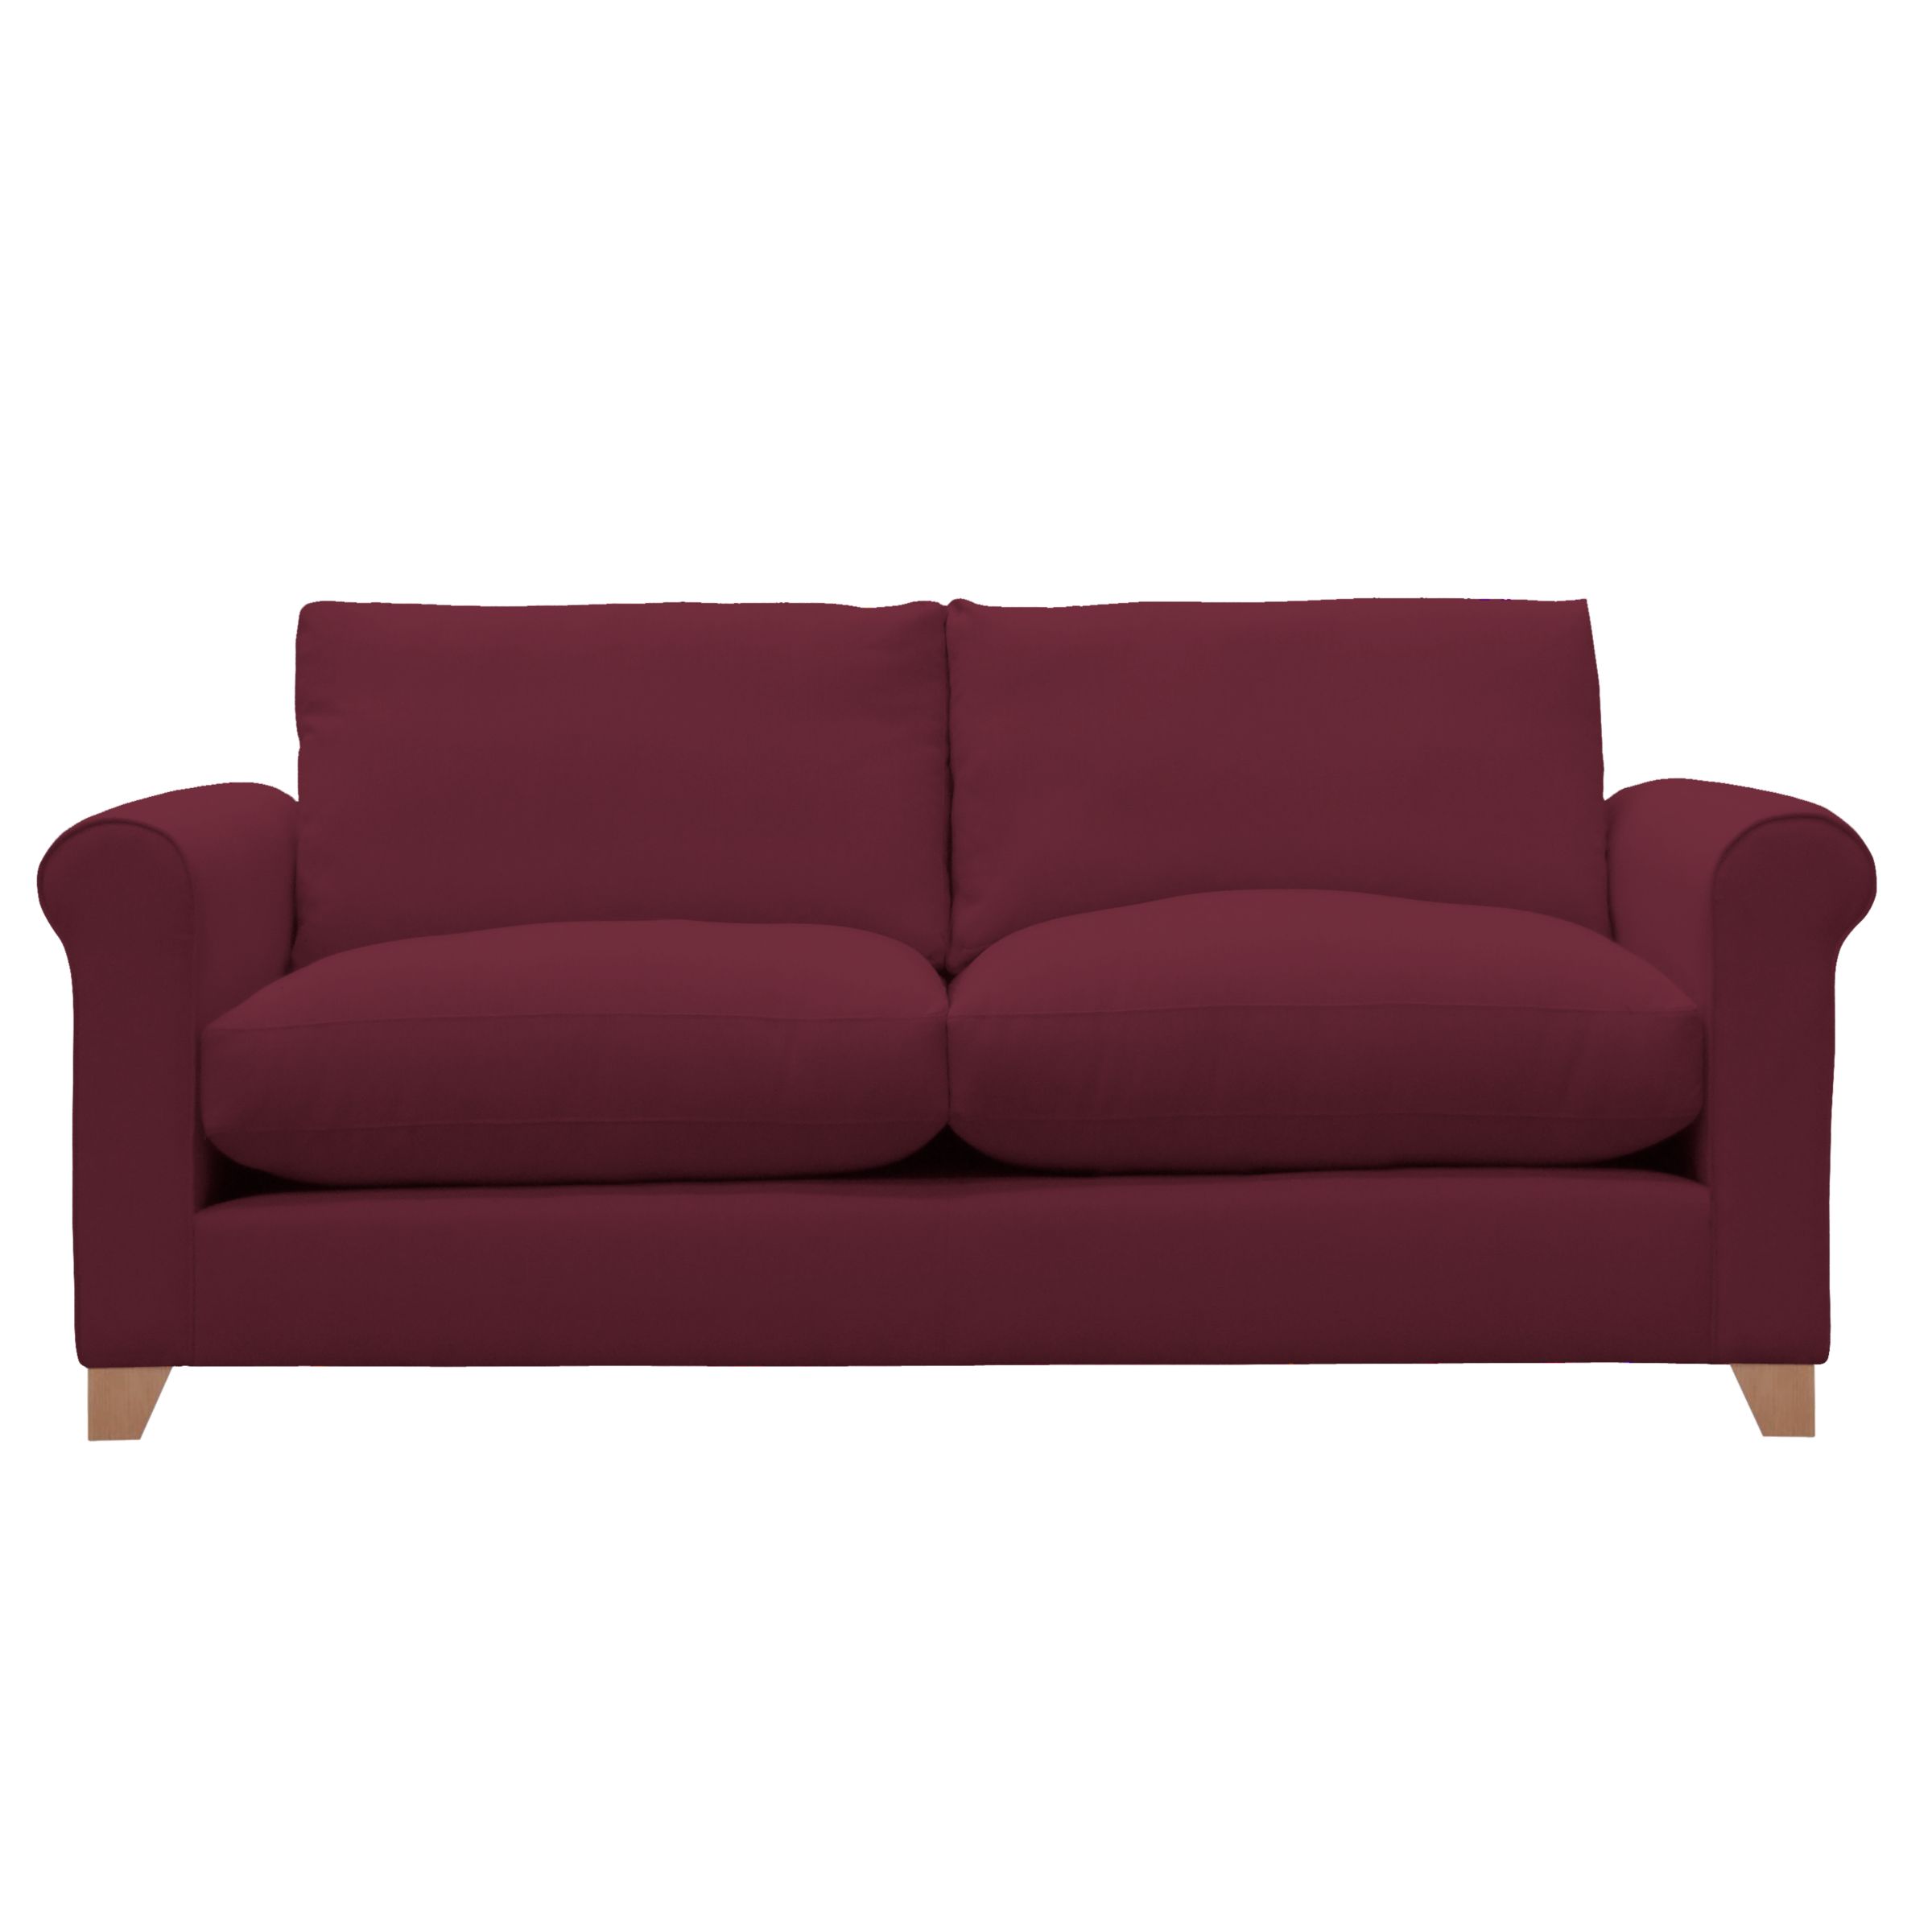 John Lewis Options Scroll Arm Large Sofa, Linley Mulberry, width 192cm